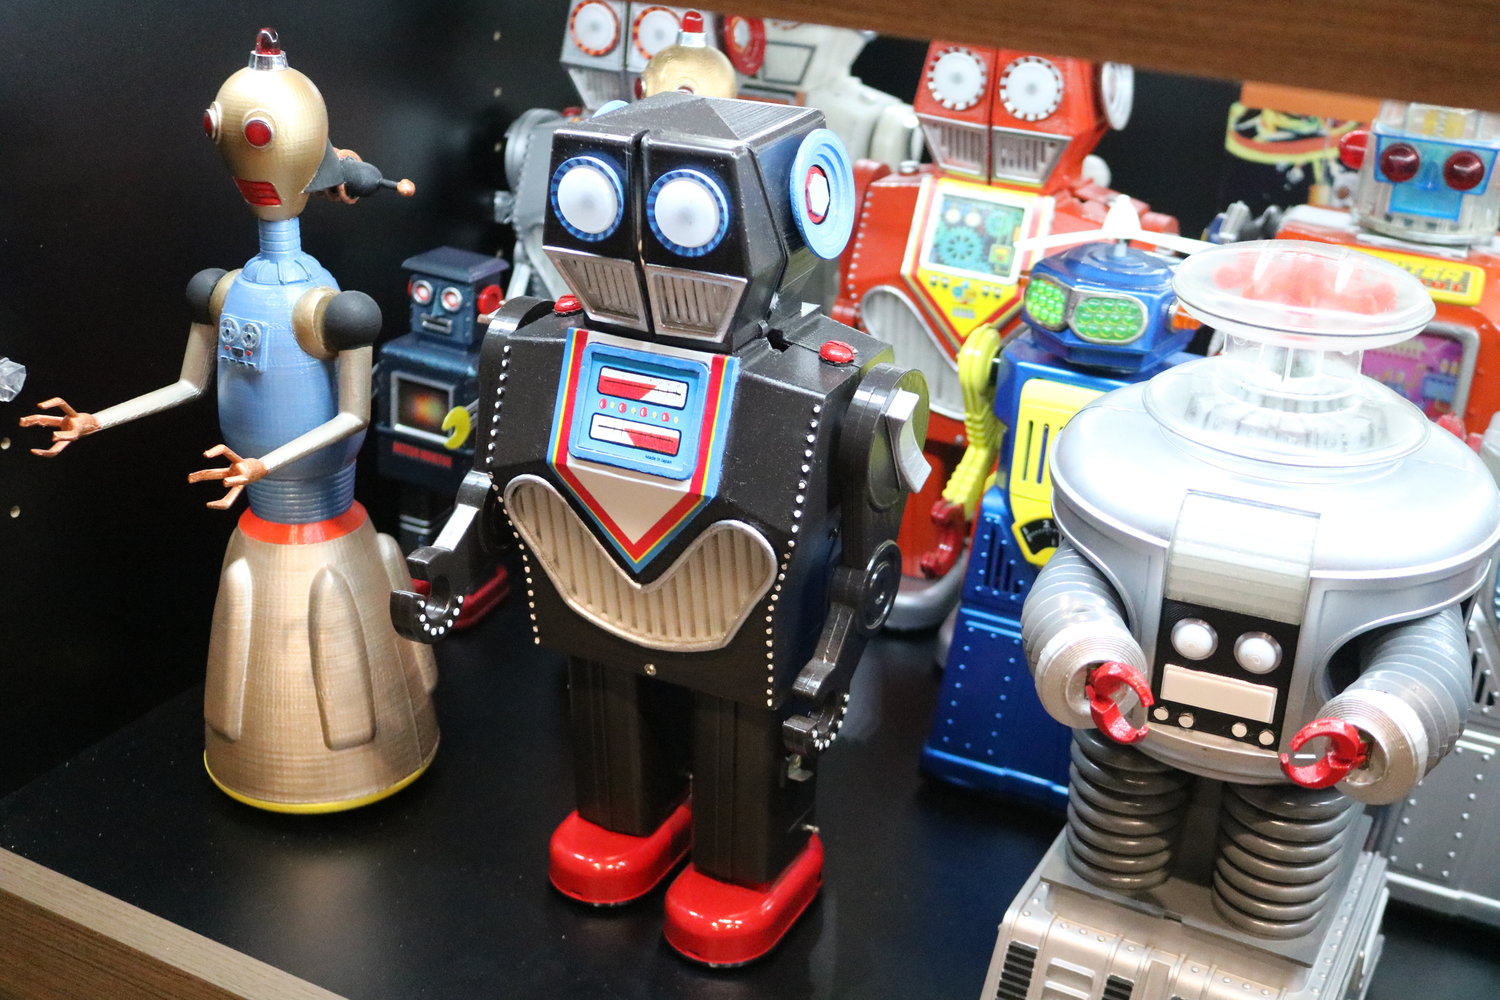 Toy robots of all shapes and sizes make up the eclectic mix of rare items featured at the Bilotta Collection in Ponte Vedra Beach.